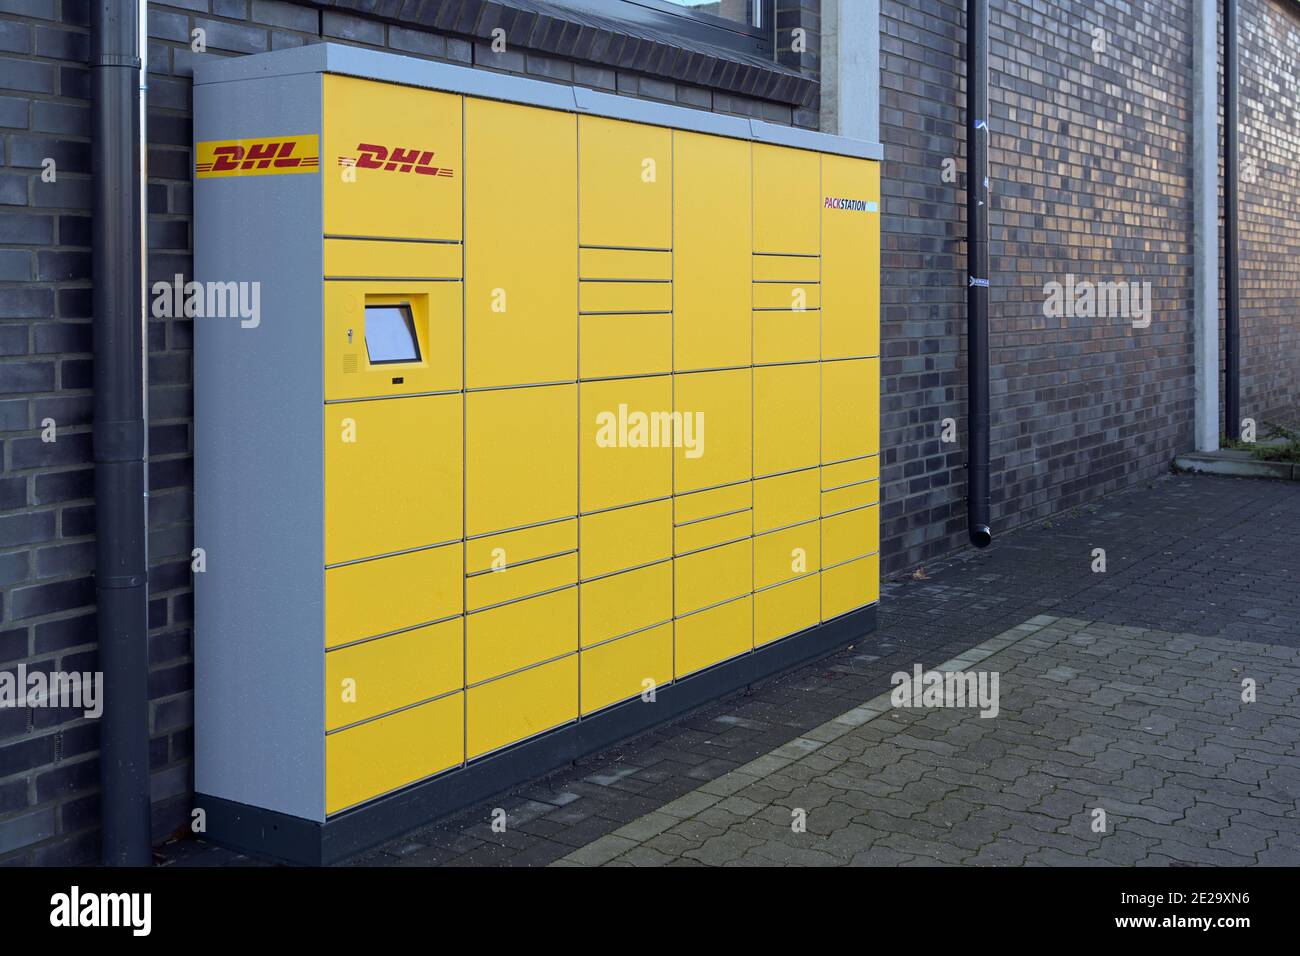 Ratzeburg, Germany, January 12, 2021: DHL Packstation with boxes where customers can send and pick up their ordered packages. During the covid-19 pand Stock Photo